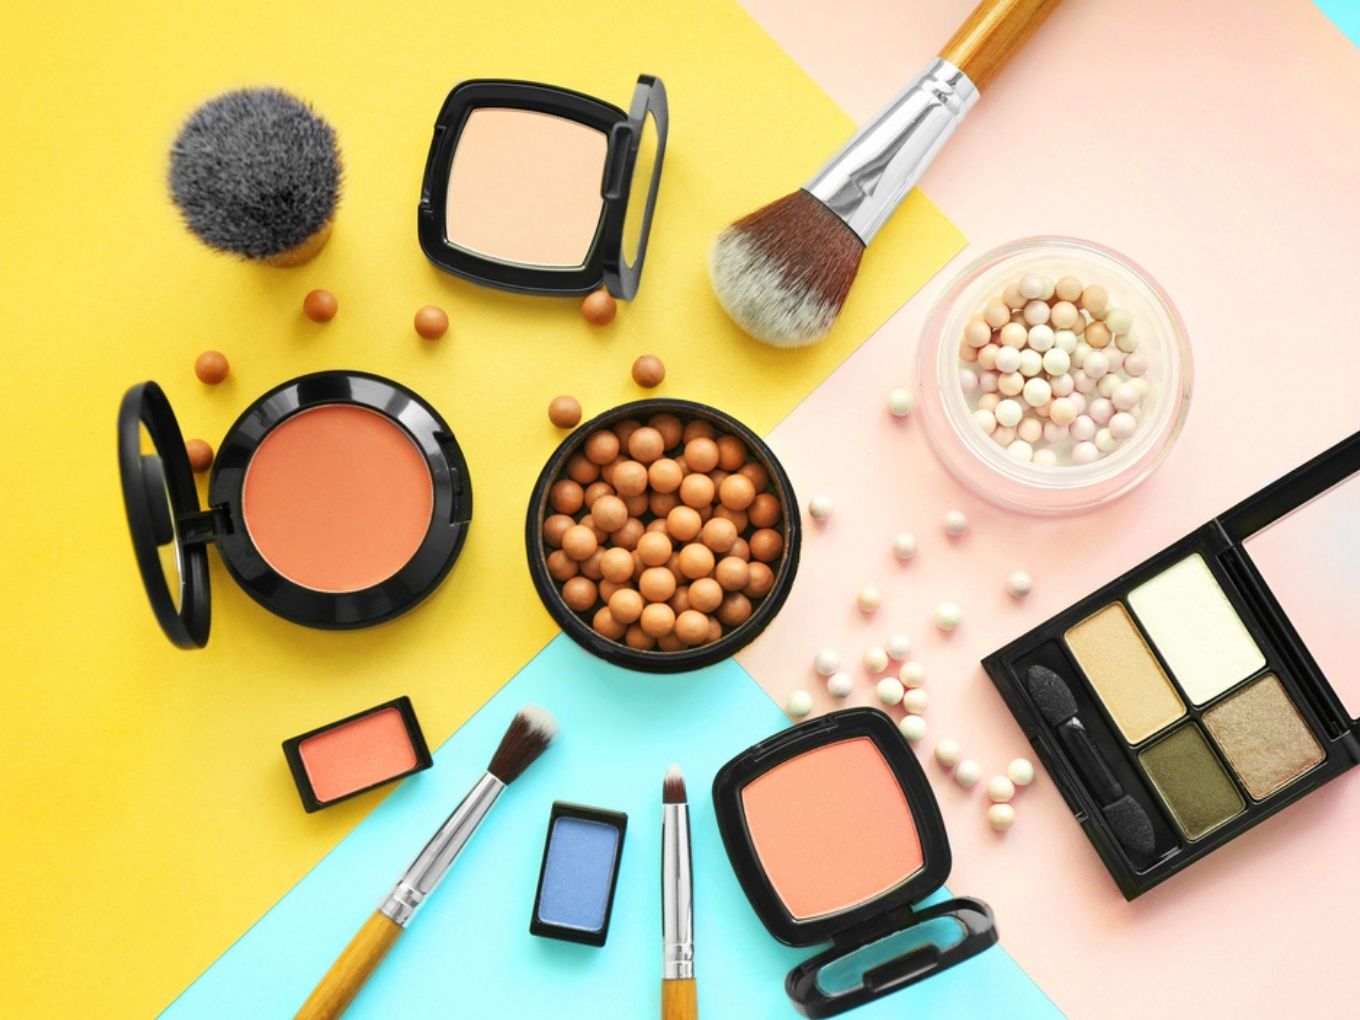 D2C Brand SUGAR Cosmetics Closes Series C Round At Over $100 Mn Valuation